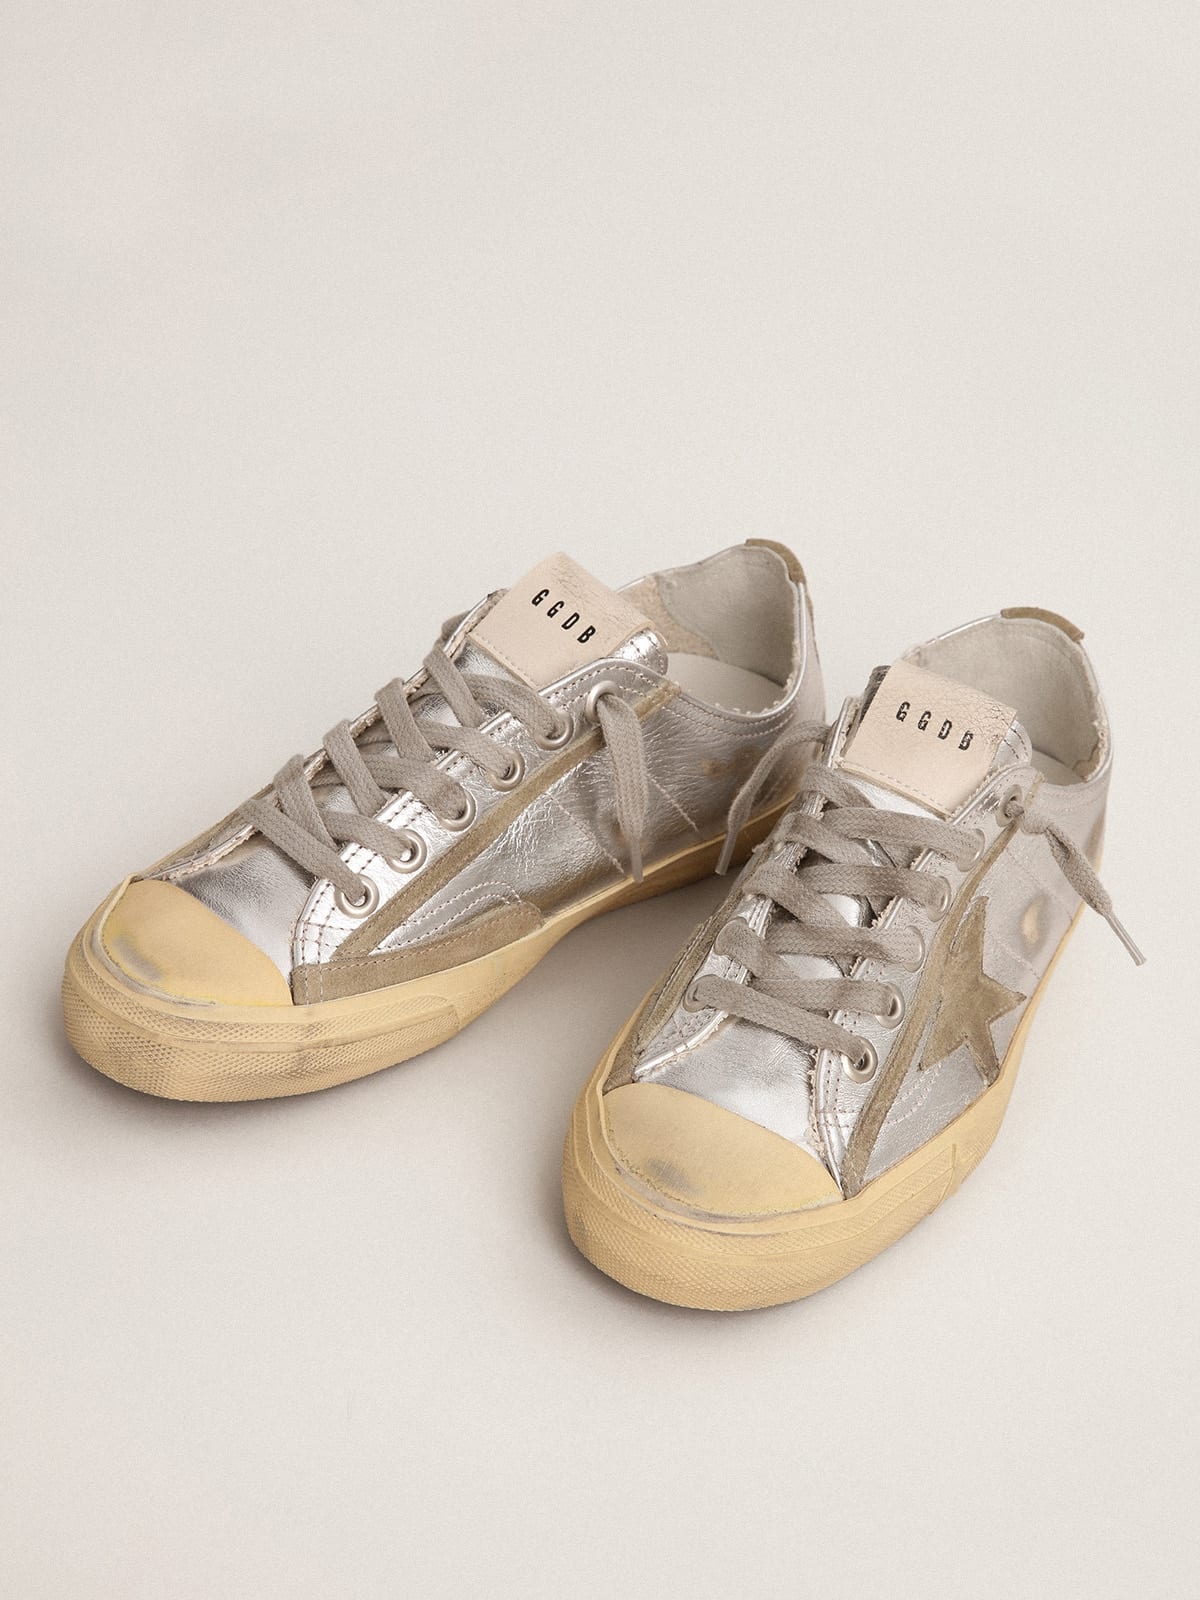 V-Star LTD sneakers in silver metallic leather with star in ice-gray suede - 2